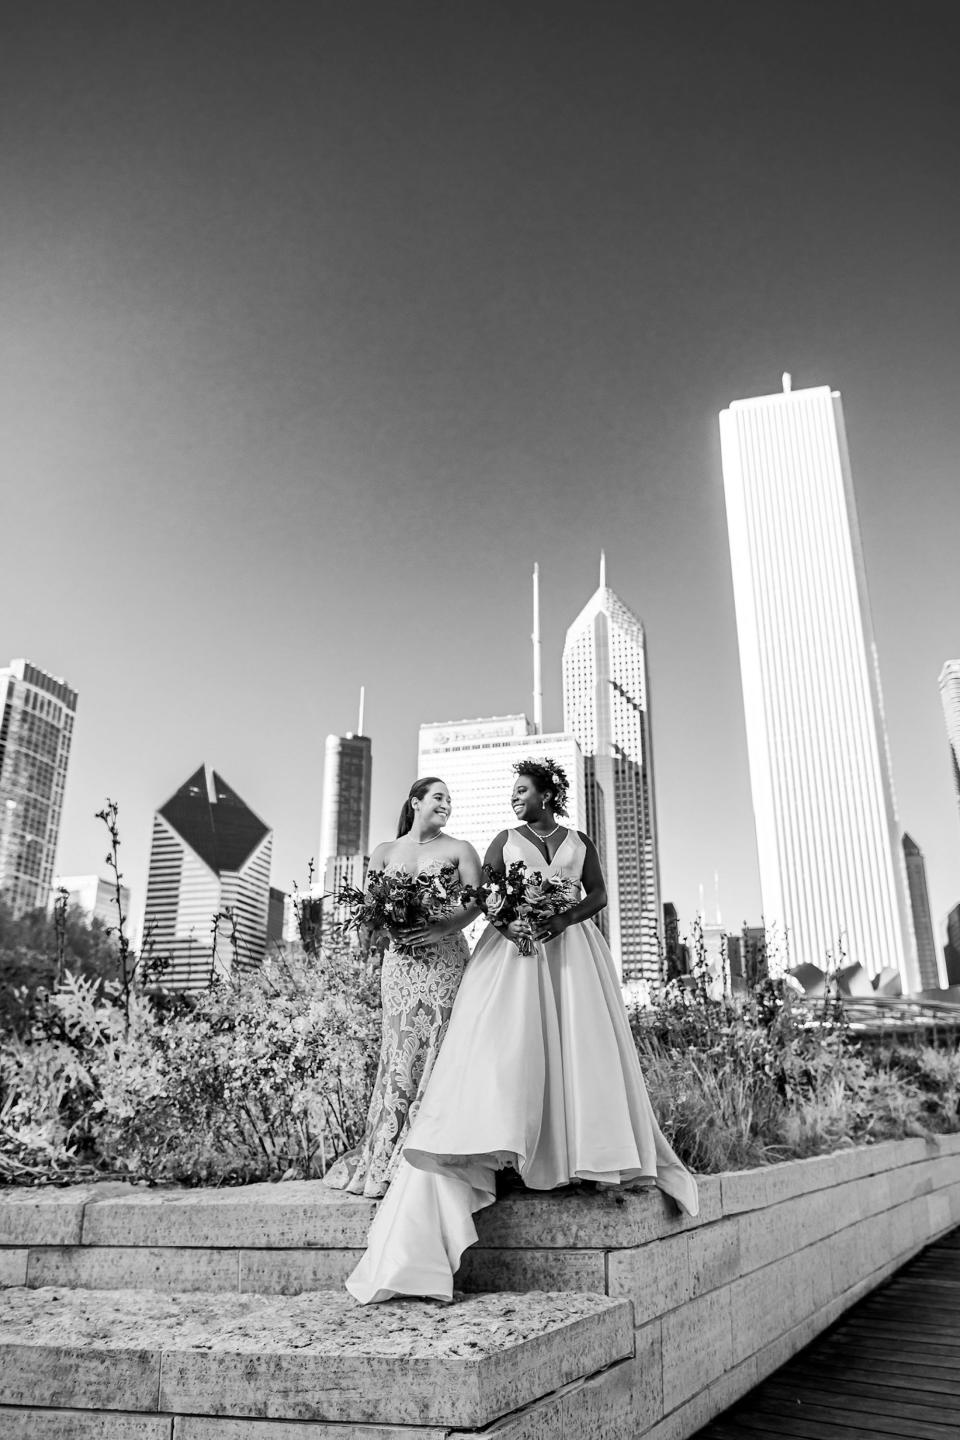 A black and white photo of two brides looking at each other in front of a cityscape.